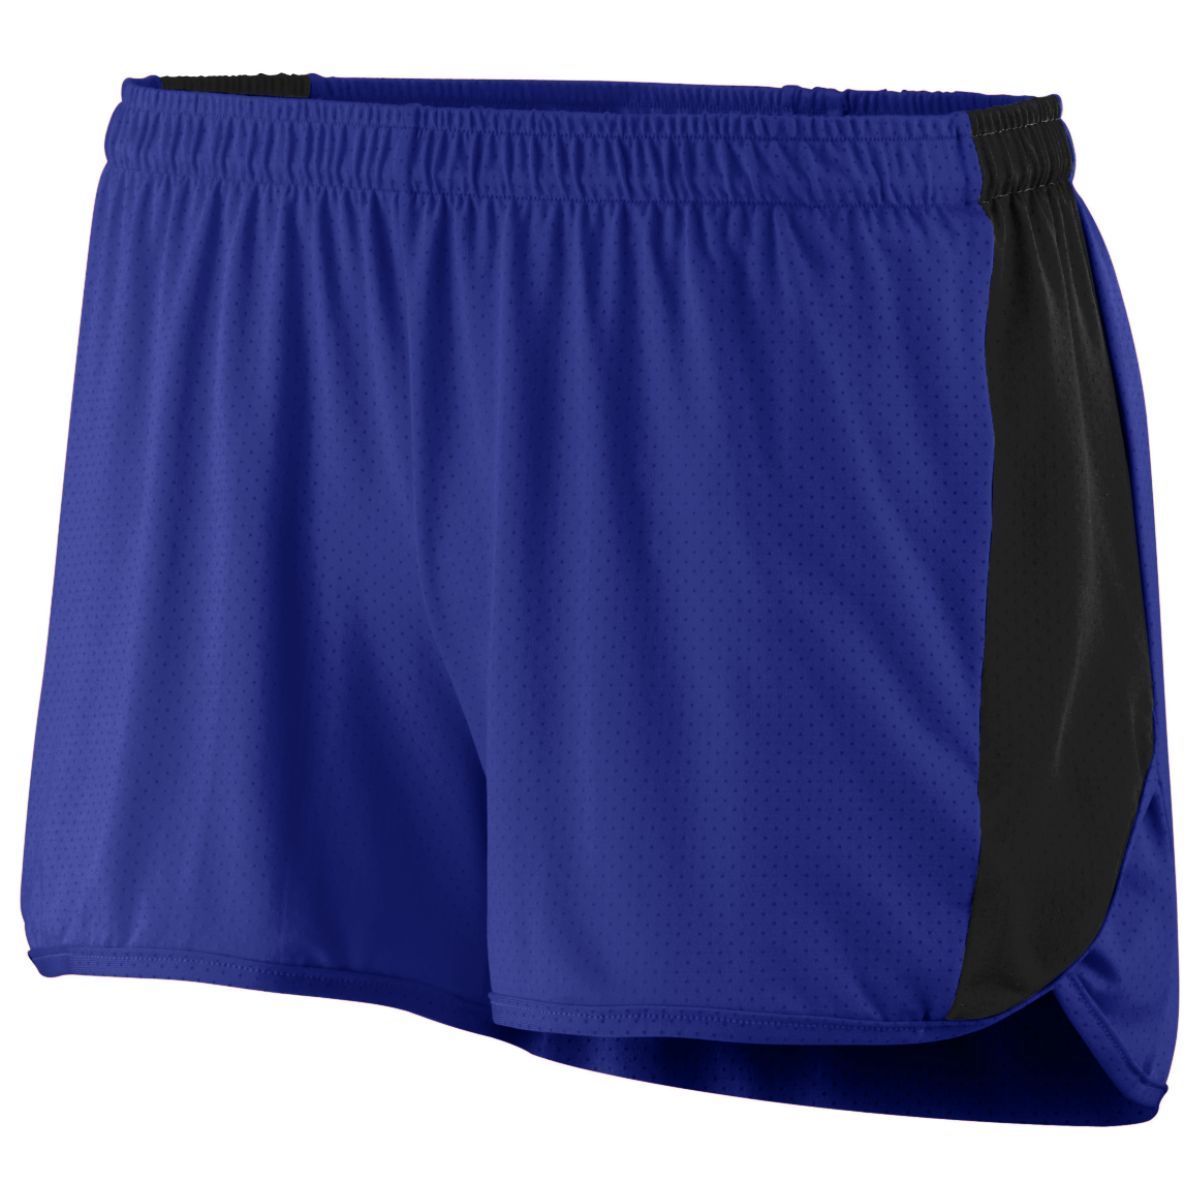 Augusta Sportswear Ladies Sprint Shorts in Purple/Black  -Part of the Ladies, Ladies-Shorts, Augusta-Products, Track-Field product lines at KanaleyCreations.com